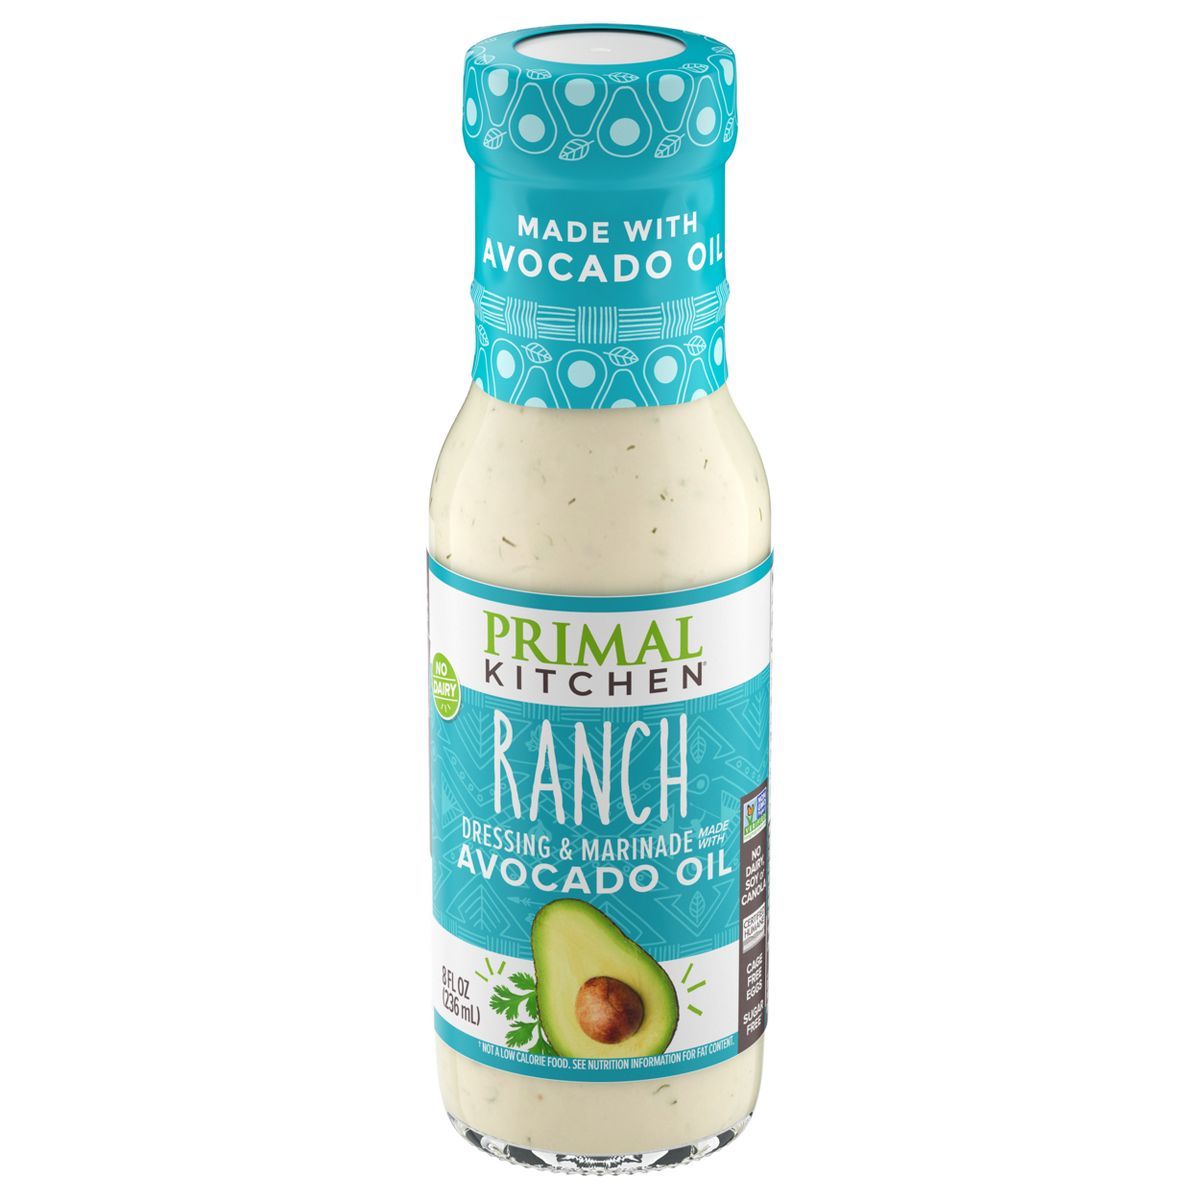 Primal Kitchen Dairy-Free Ranch Dressing with Avocado Oil - 8fl oz | Target